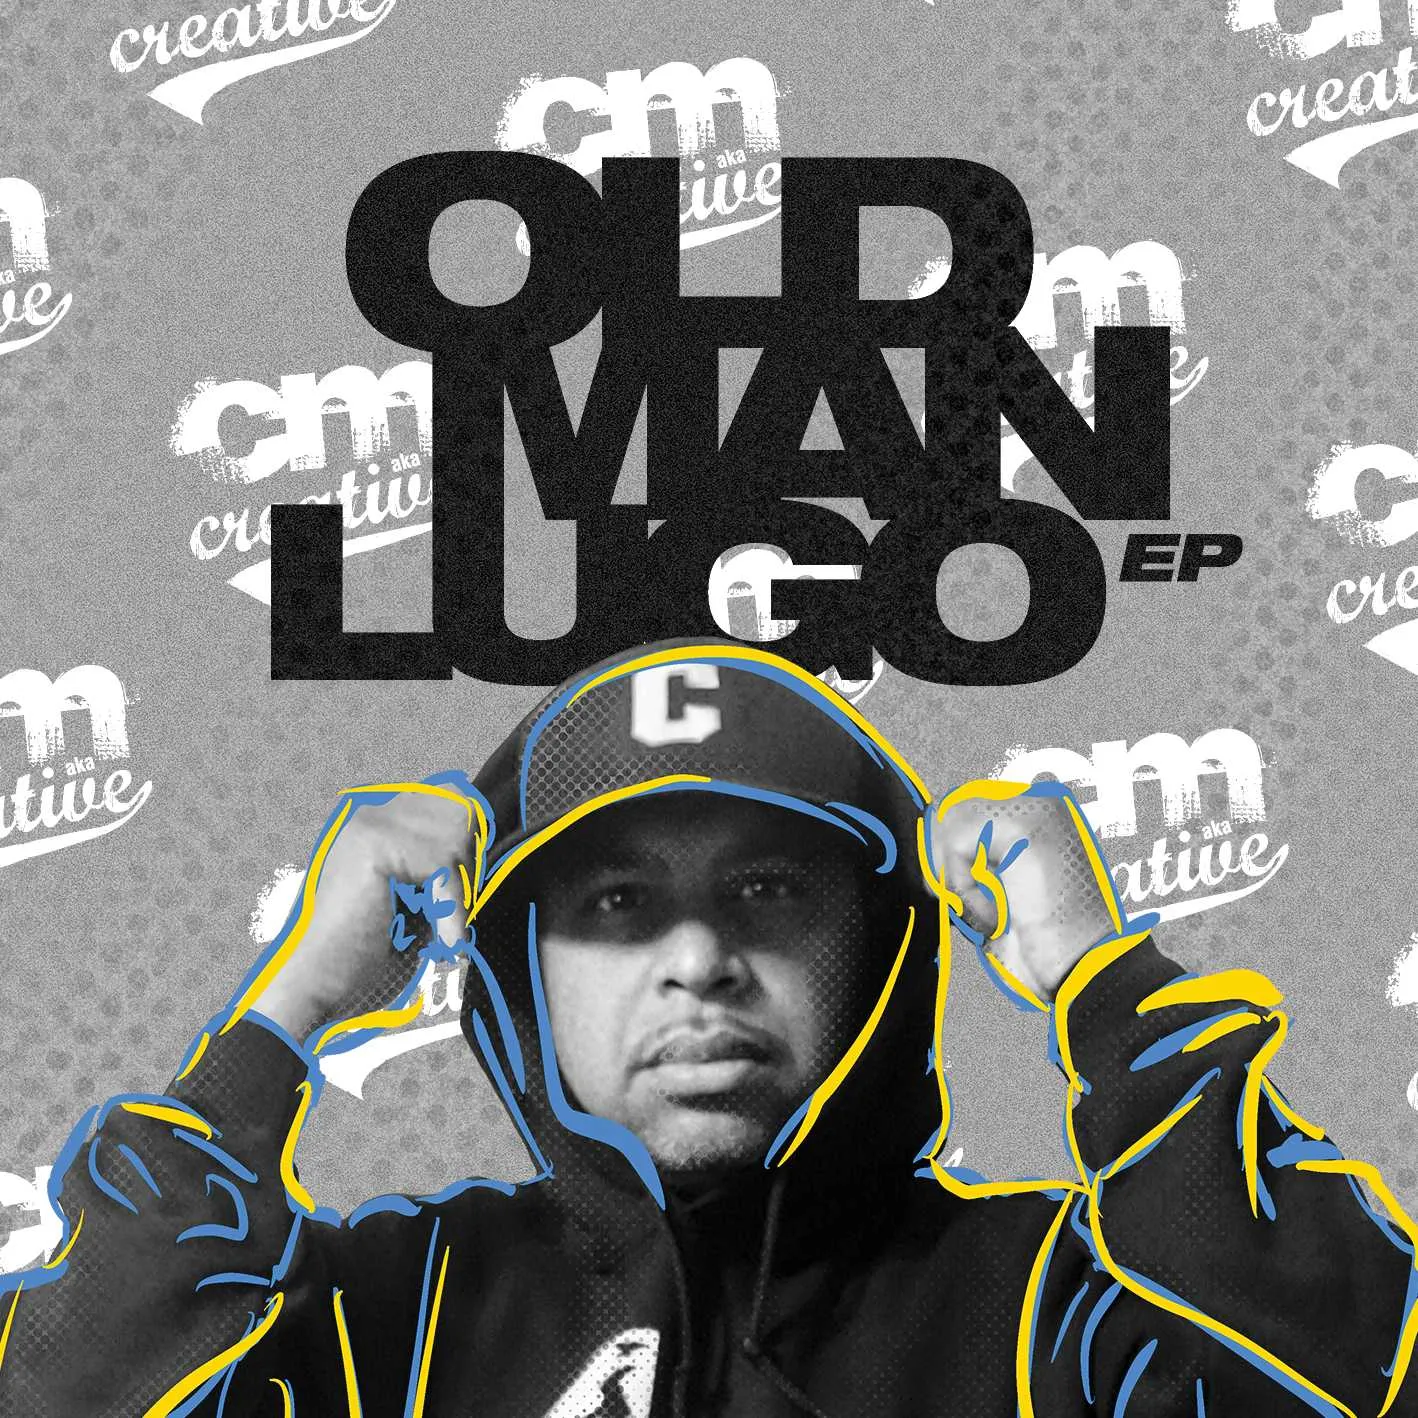 Album cover for “Old Man Lugo EP” by CM aka Creative